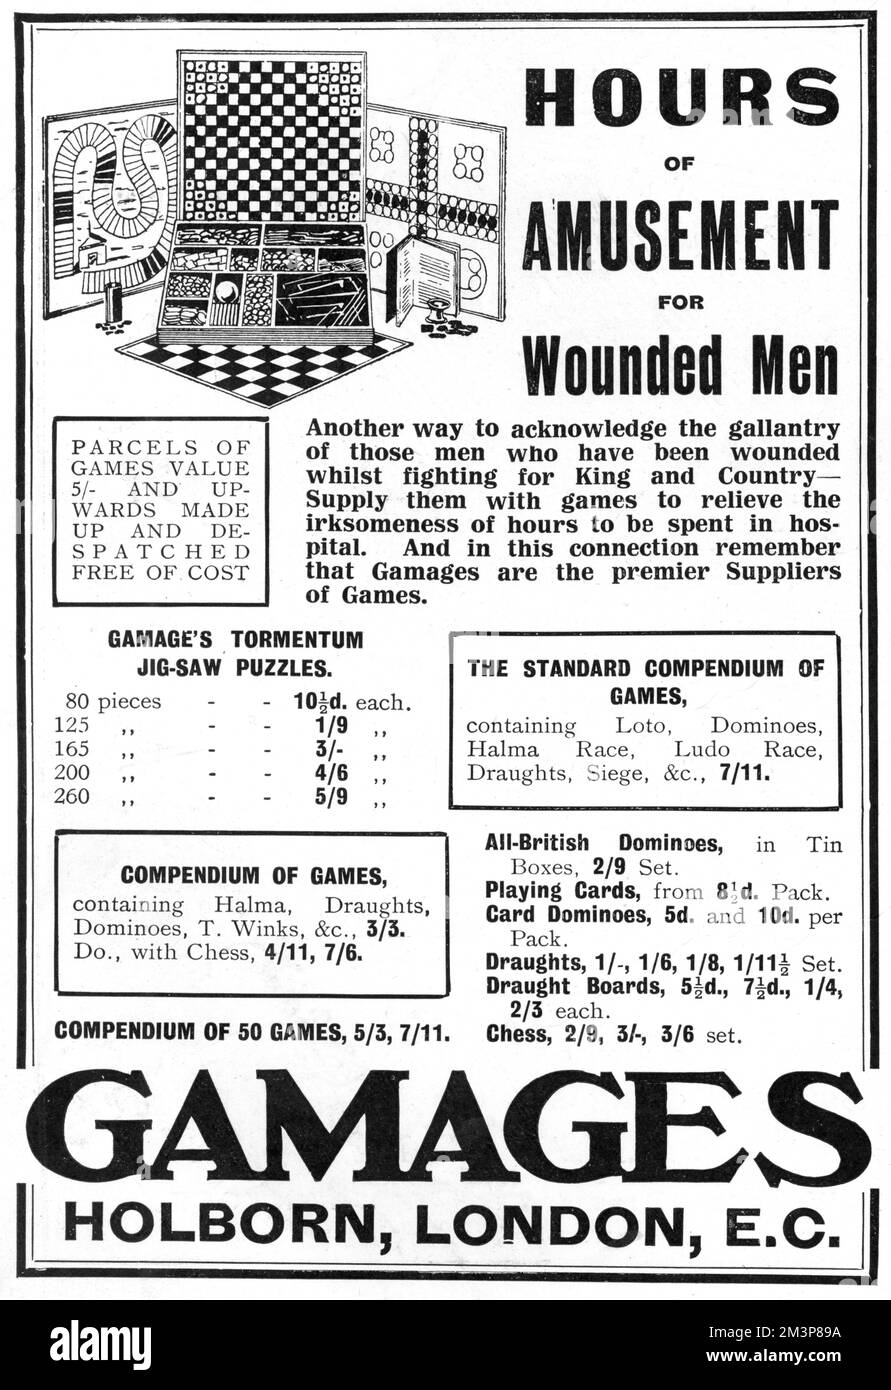 An advertisement for Gamage's, the famous toy store in Holborn, London, advertising its wide range of board games, jigsaw puzzles and compendiums, ideal for wounded men.       Date: 1914 Stock Photo